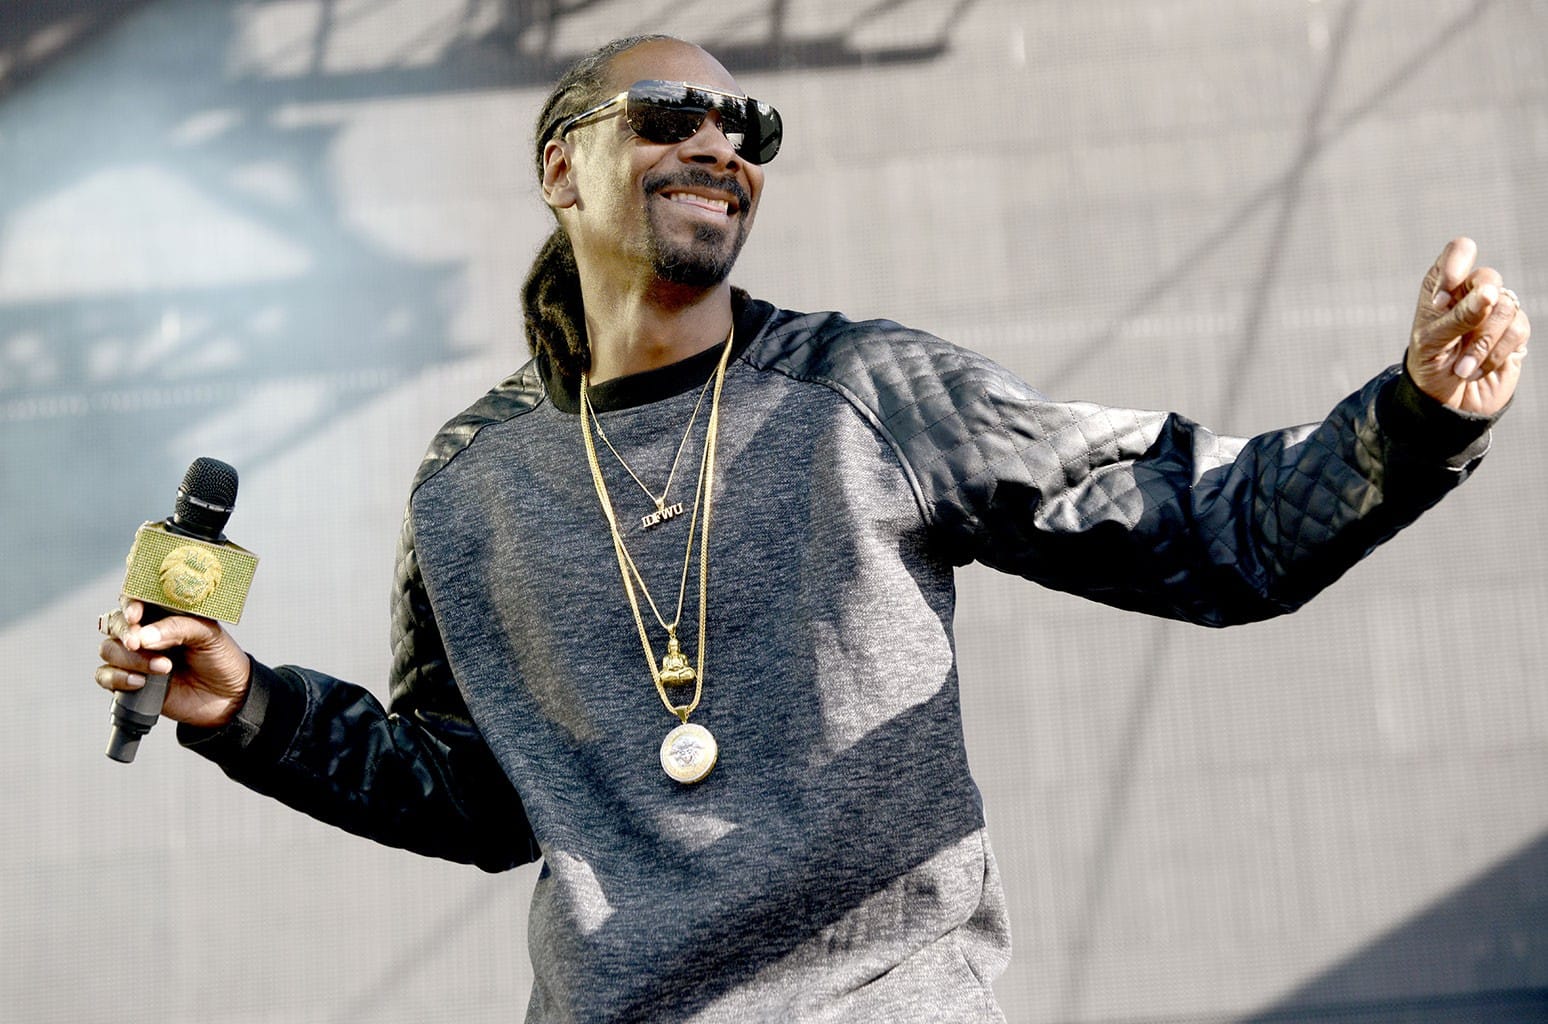 Snoop Dogg reveals his NFT collections